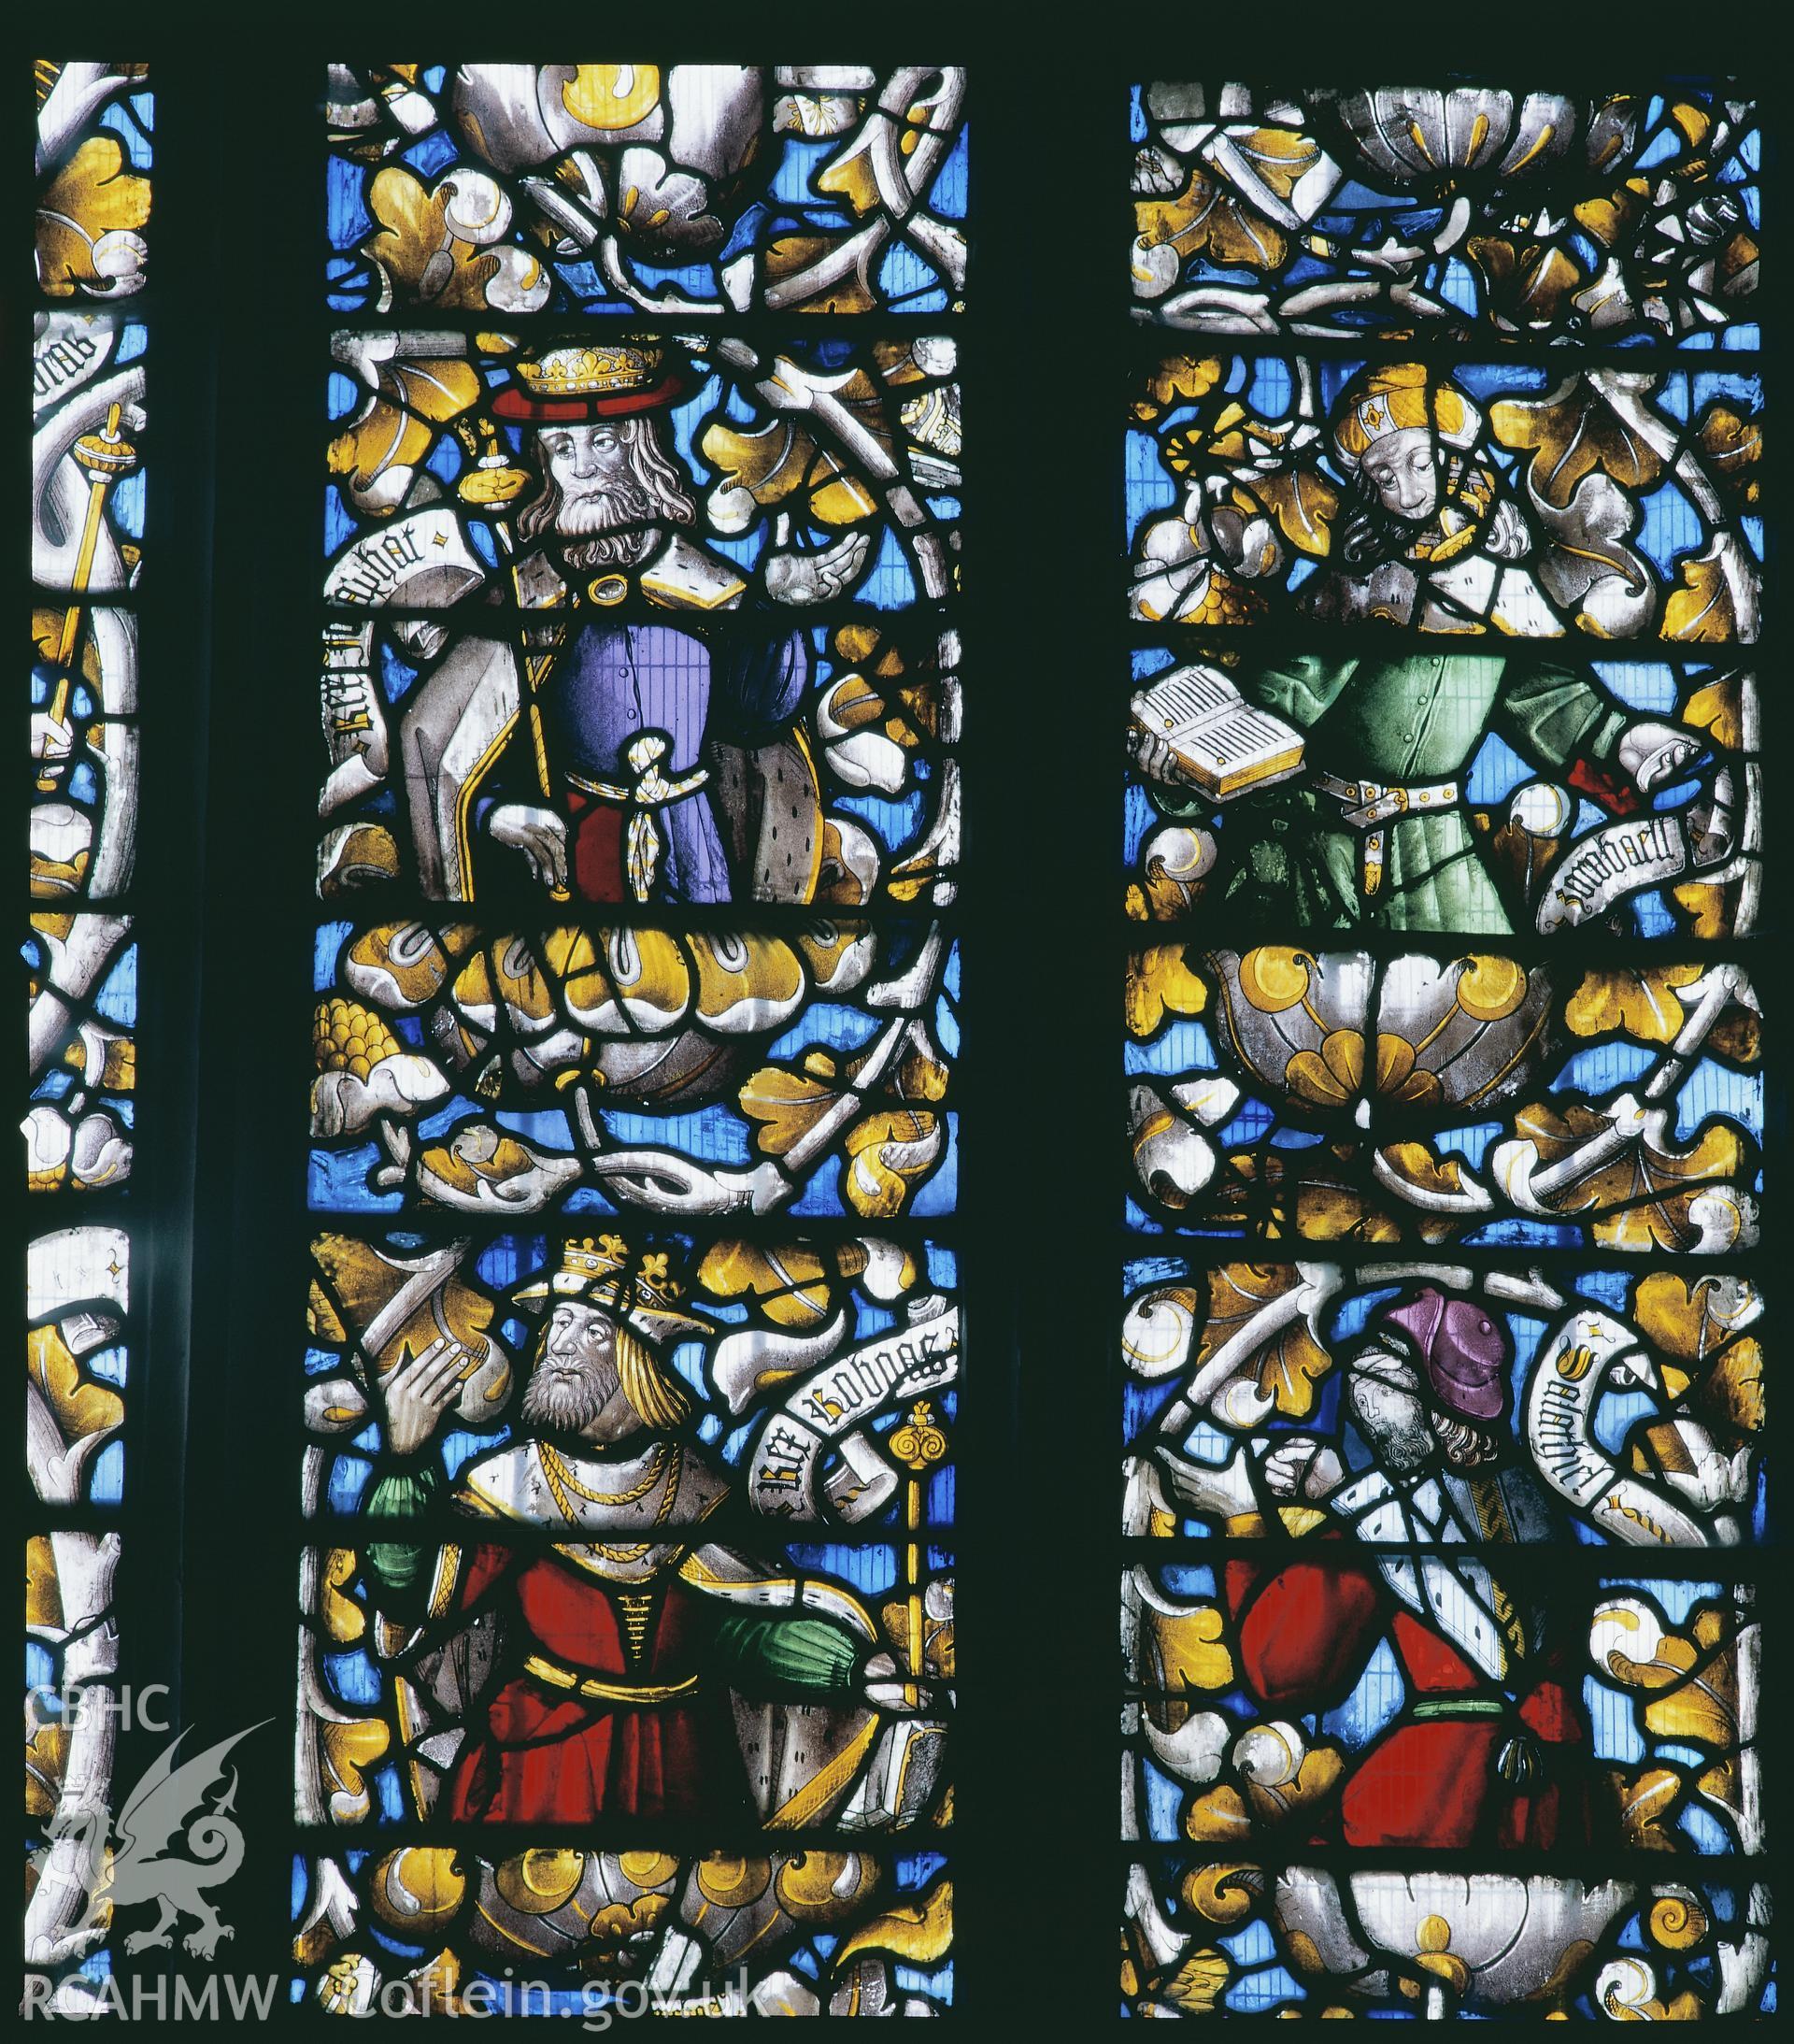 RCAHMW colour transparency of a stained glass window depicting the Jesse Tree in St. Dyfnog's Church, Llanrhaeadr-yng-Nghinmeirch, by Fleur James, 1986.